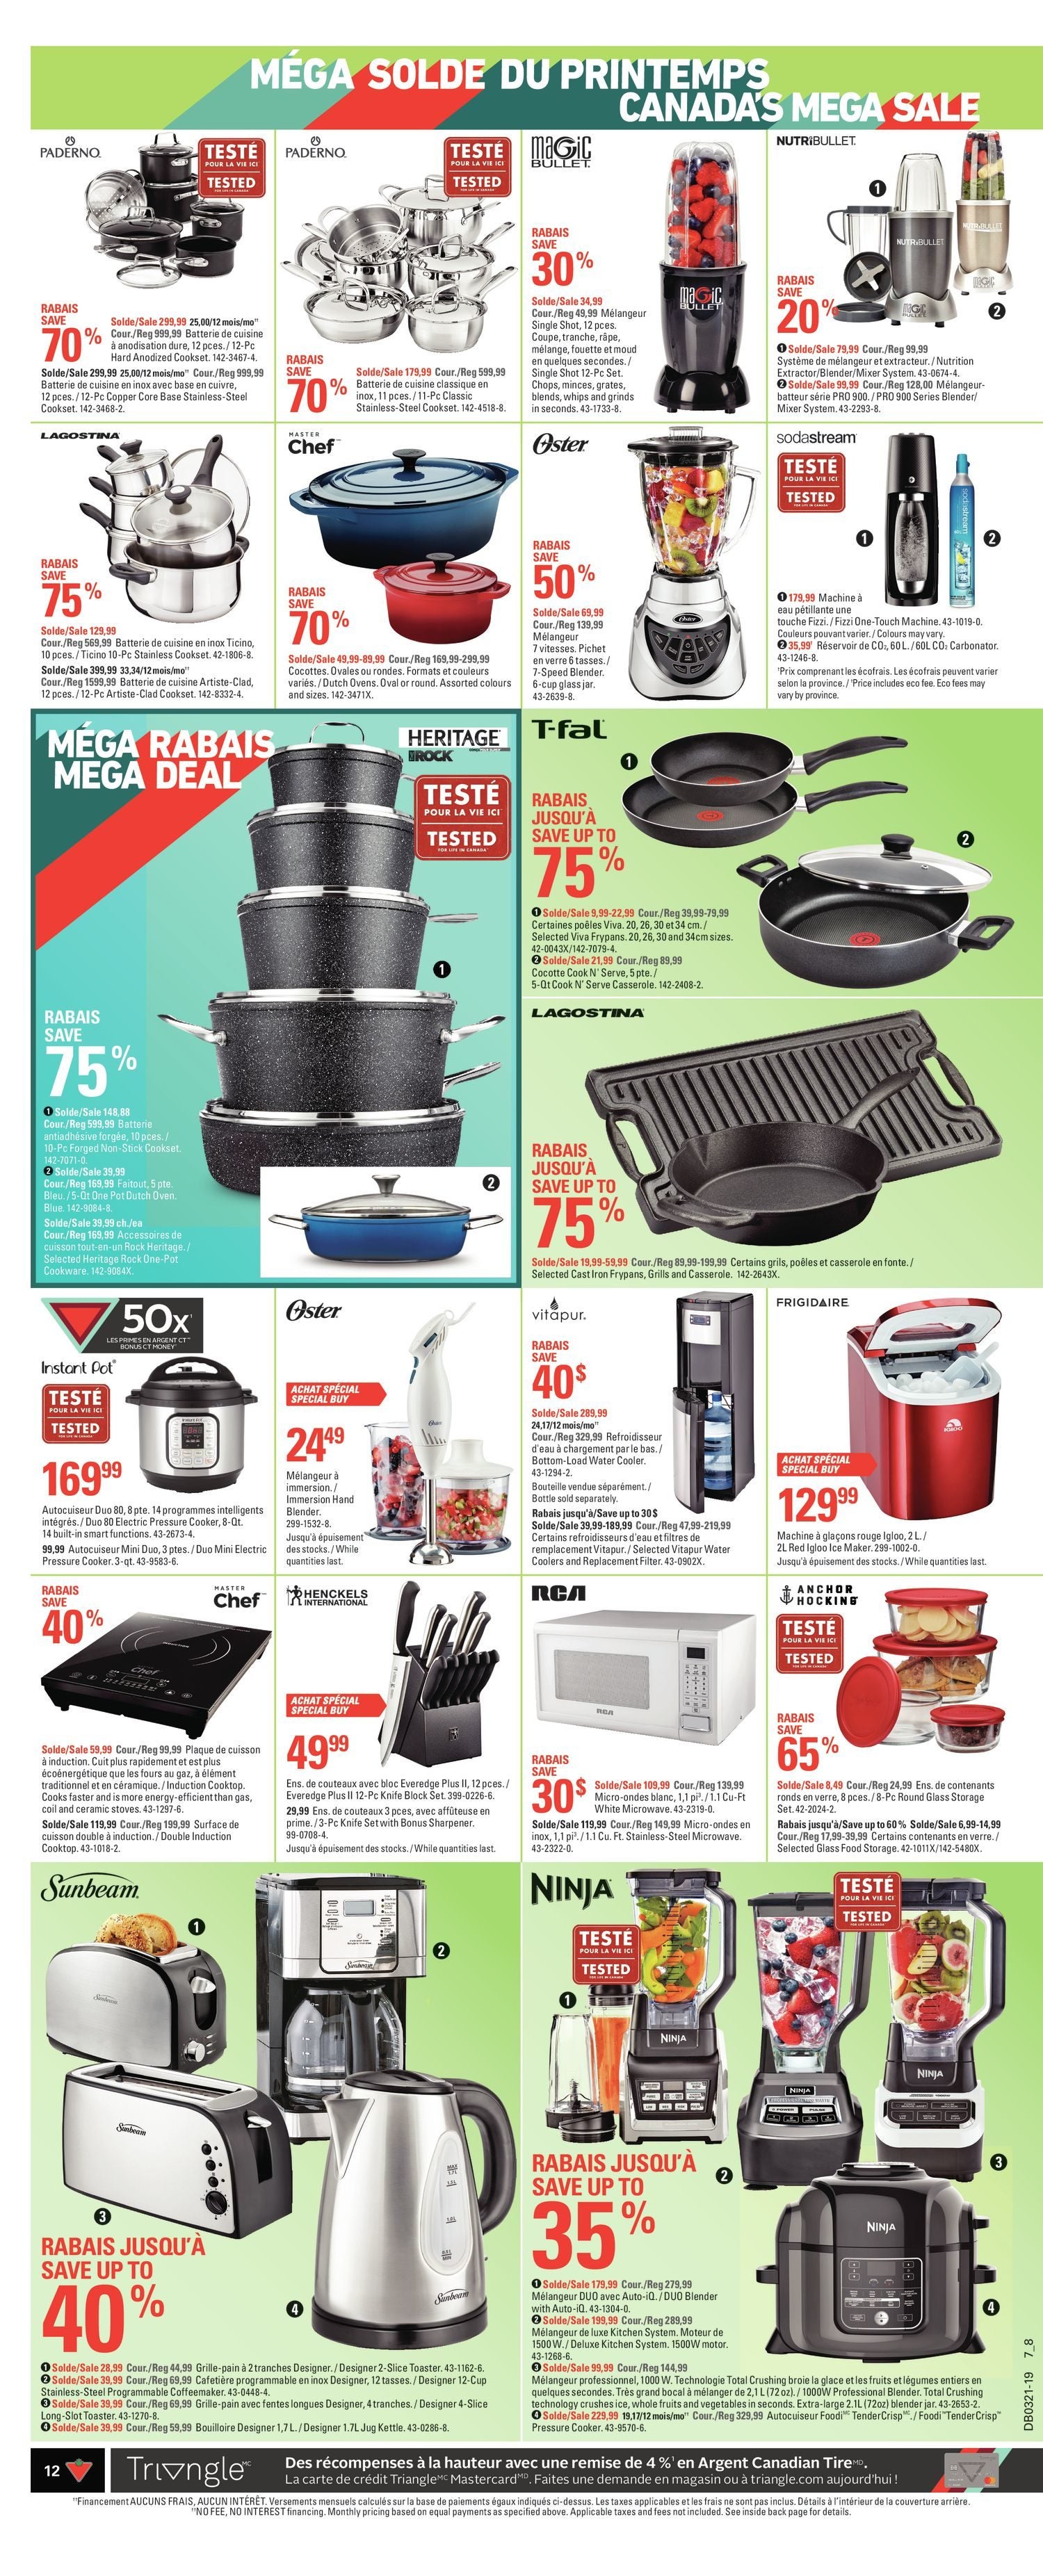 Canadian Tire Weekly Flyer - Weekly - Canada's Mega Sale - May 16